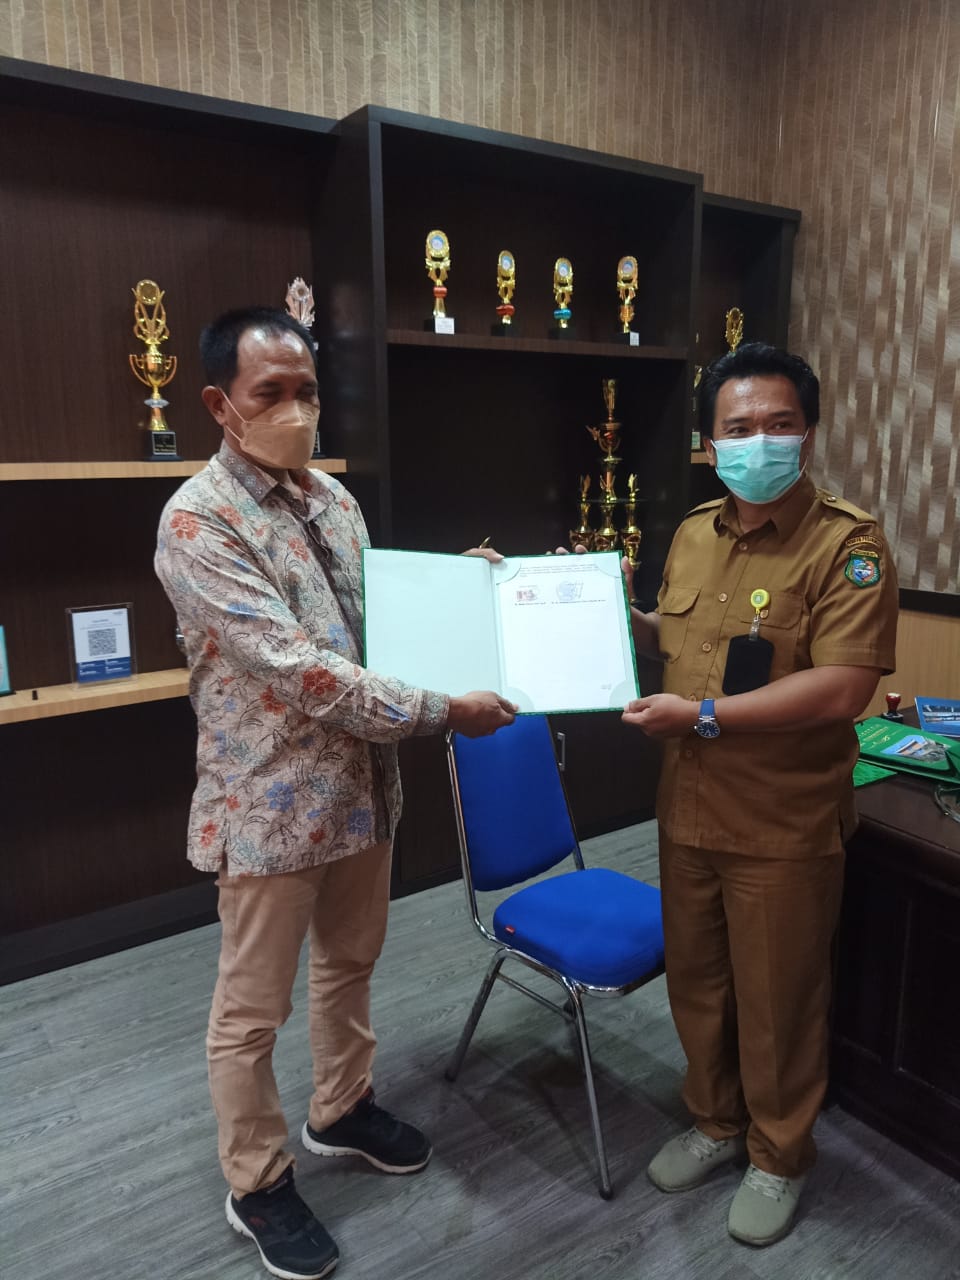 The Udayana University Faculty of Medicine supports the expansion of medical services at Pasangkayu Hospital in West Sulawesi's Pasangkayu Regency.